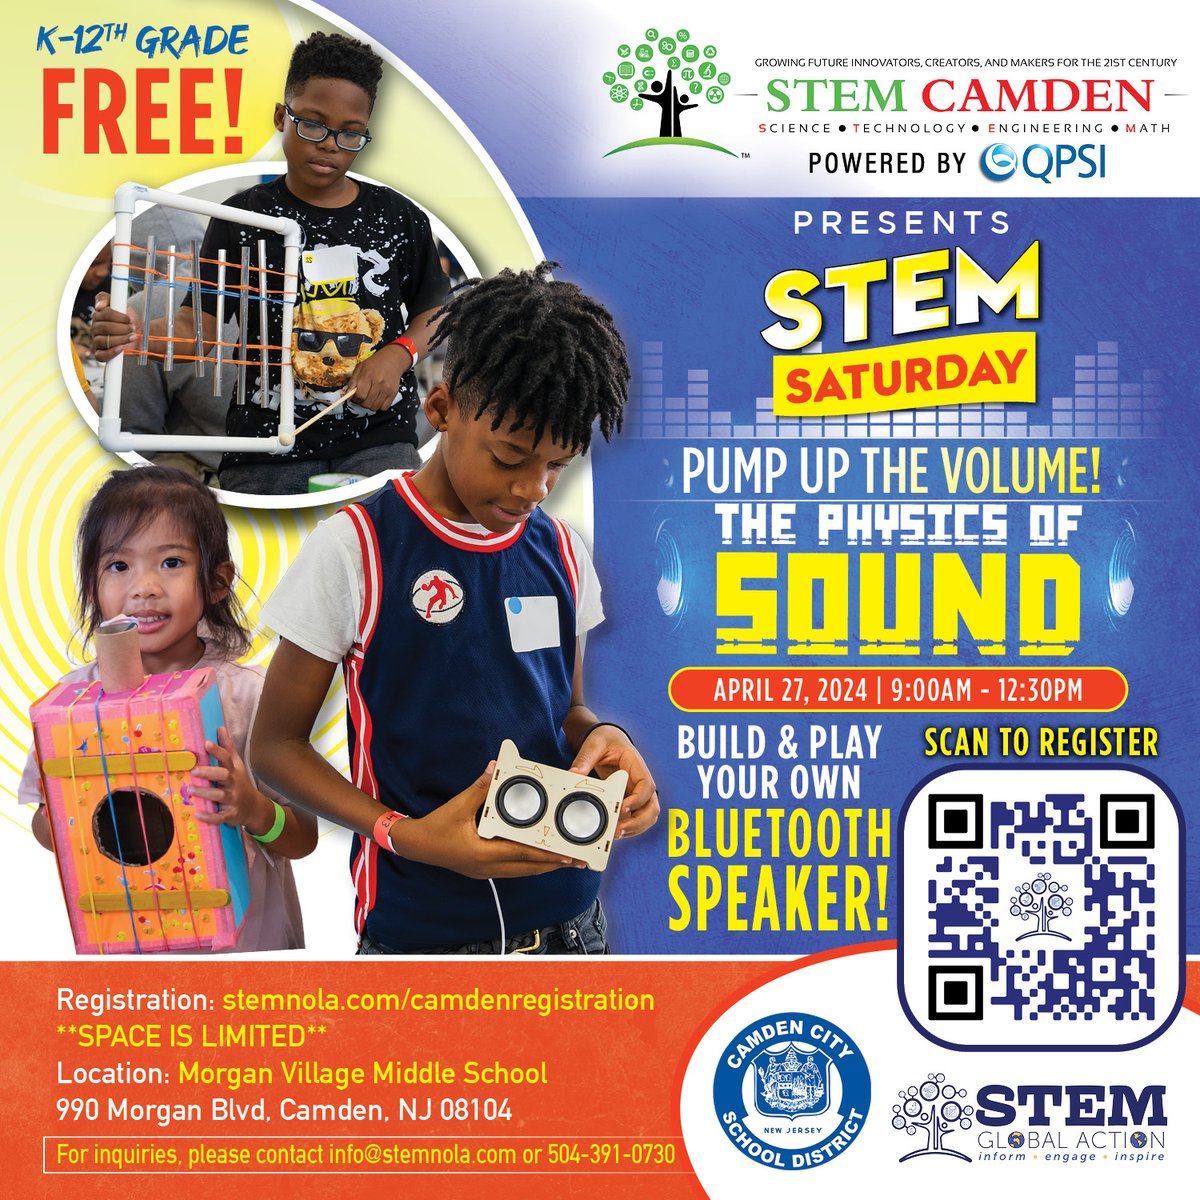 Don't miss out! Register NOW ➡️ stemnola.com/camdenregistra…  

Thank you to our event sponsors: The City of Camden and QPSI!

#STEMforALL #YOUbelonginSTEM #STEMeducation